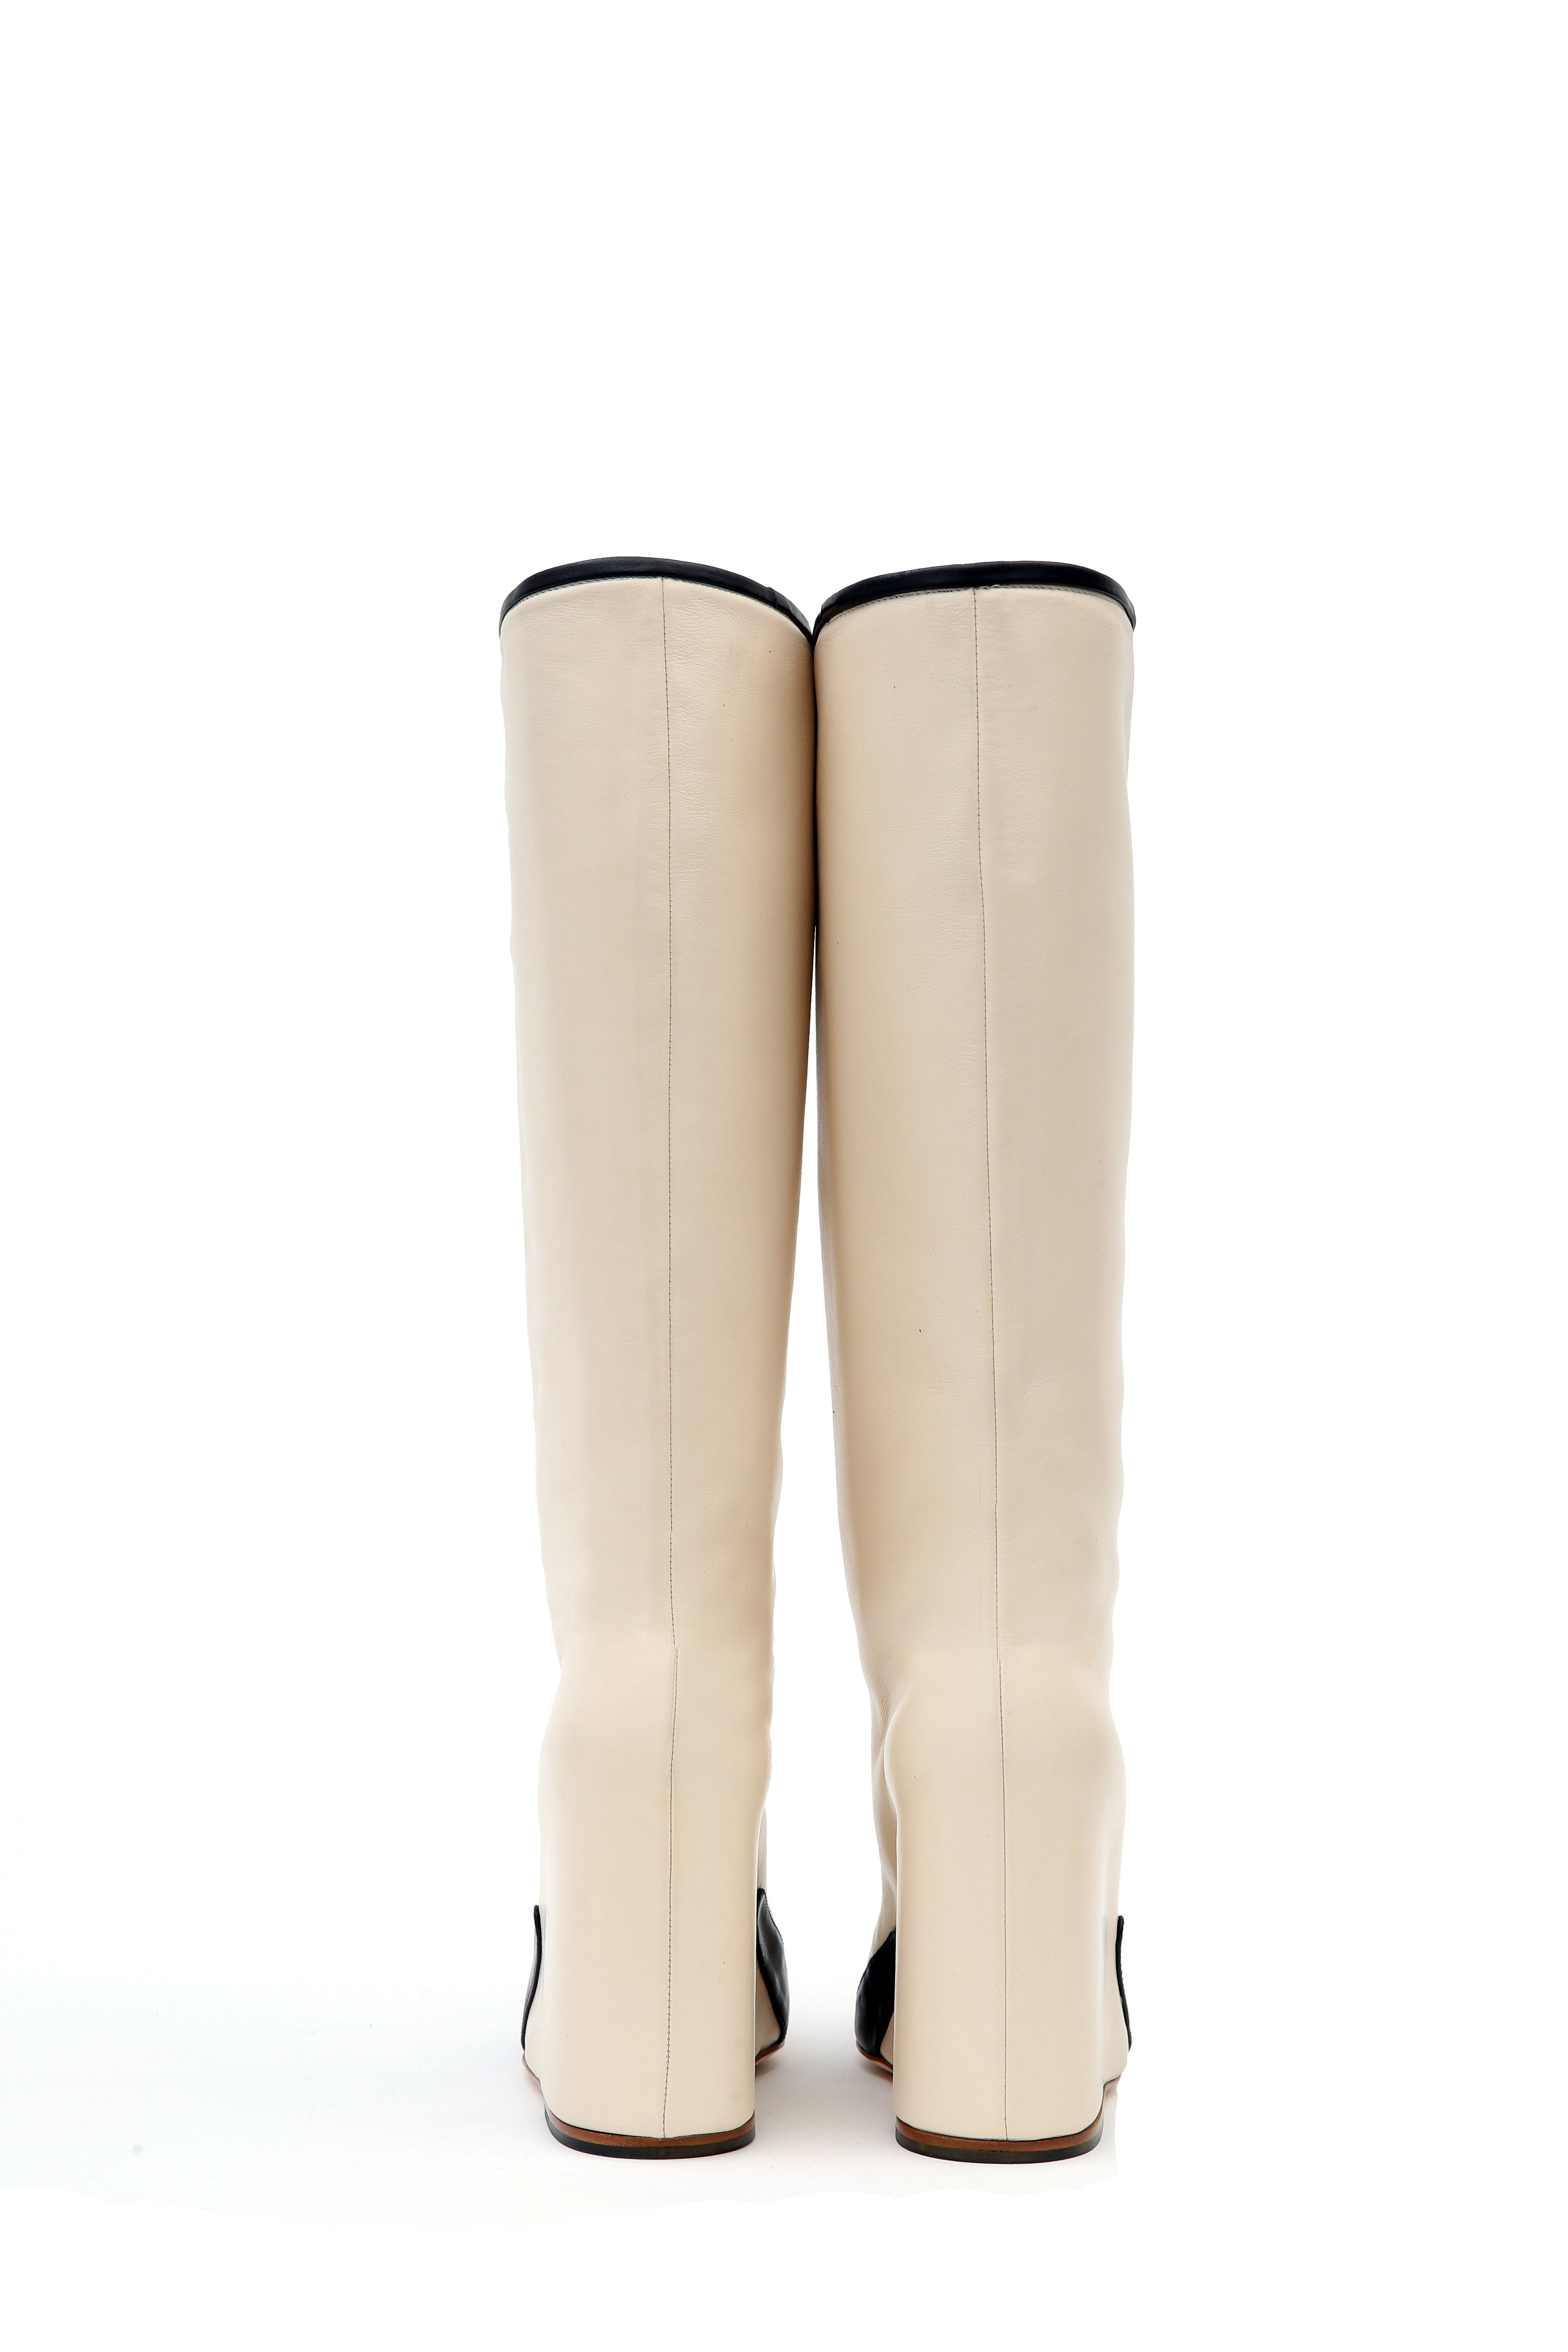 Candy Buttercup Cream and Black Calfskin Pull-on Boots